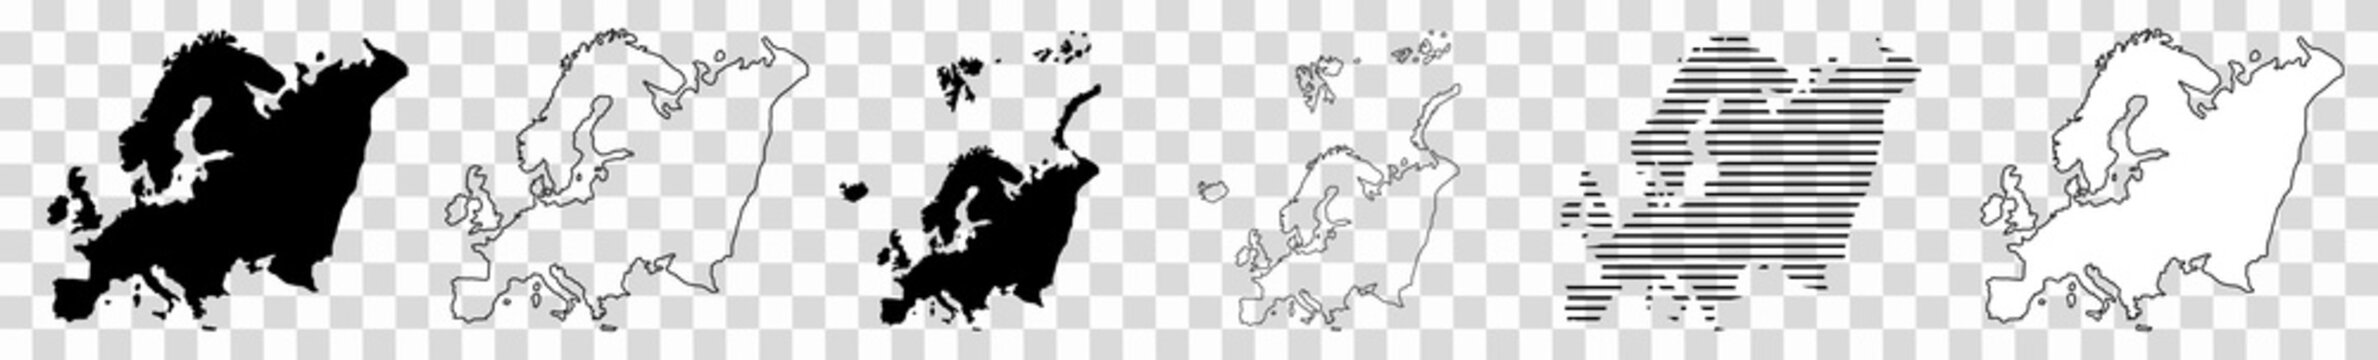 Europe Map Black | European Border | Continent | Transparent Isolated | Variations